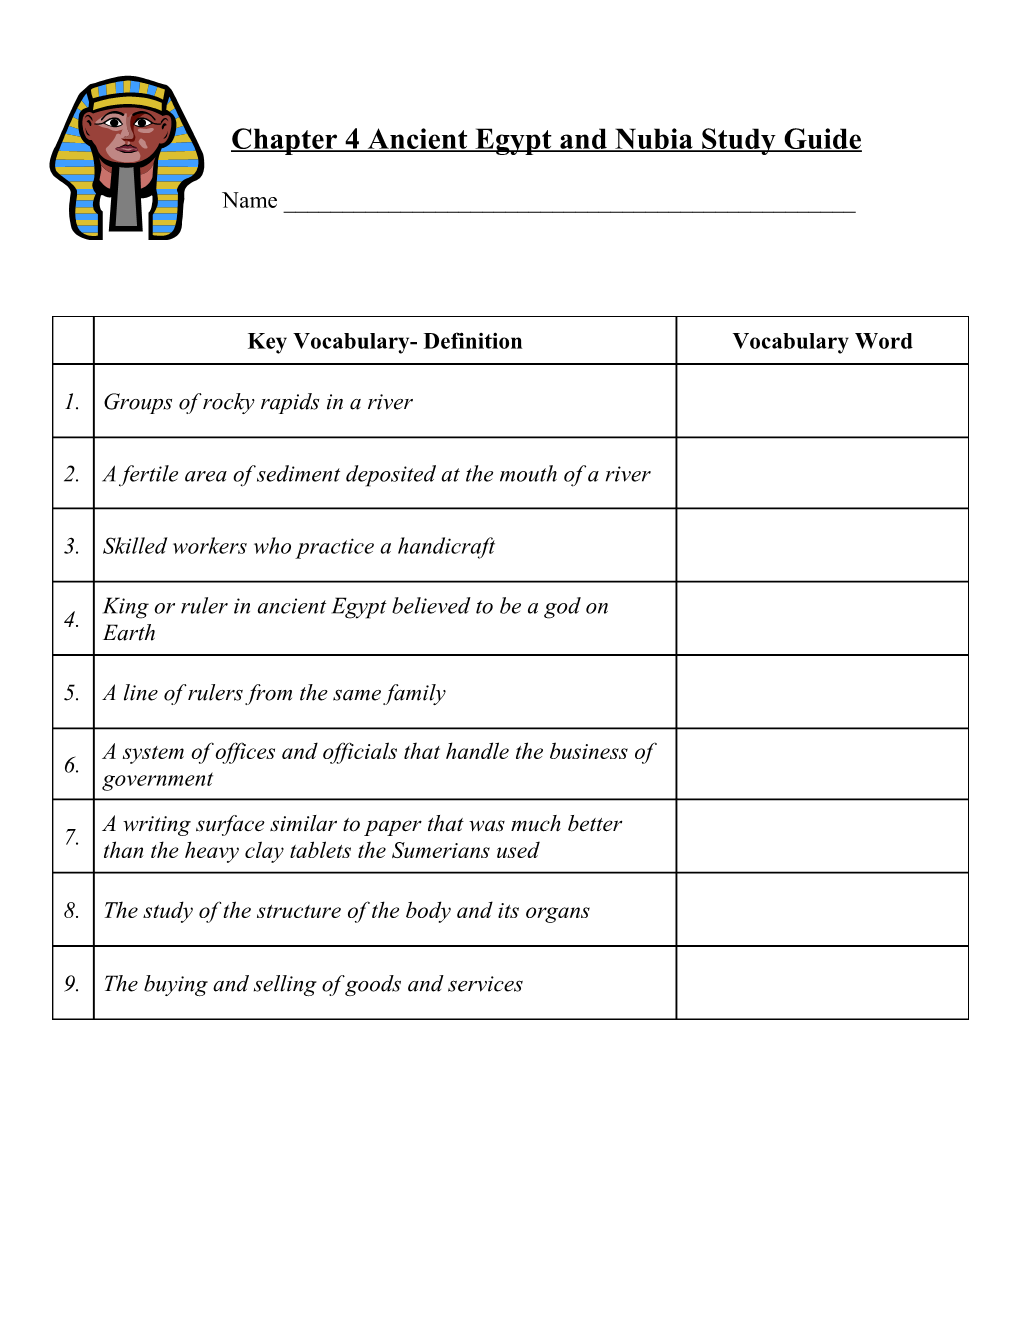 Chapter 2 Ancient Egypt Study Guide